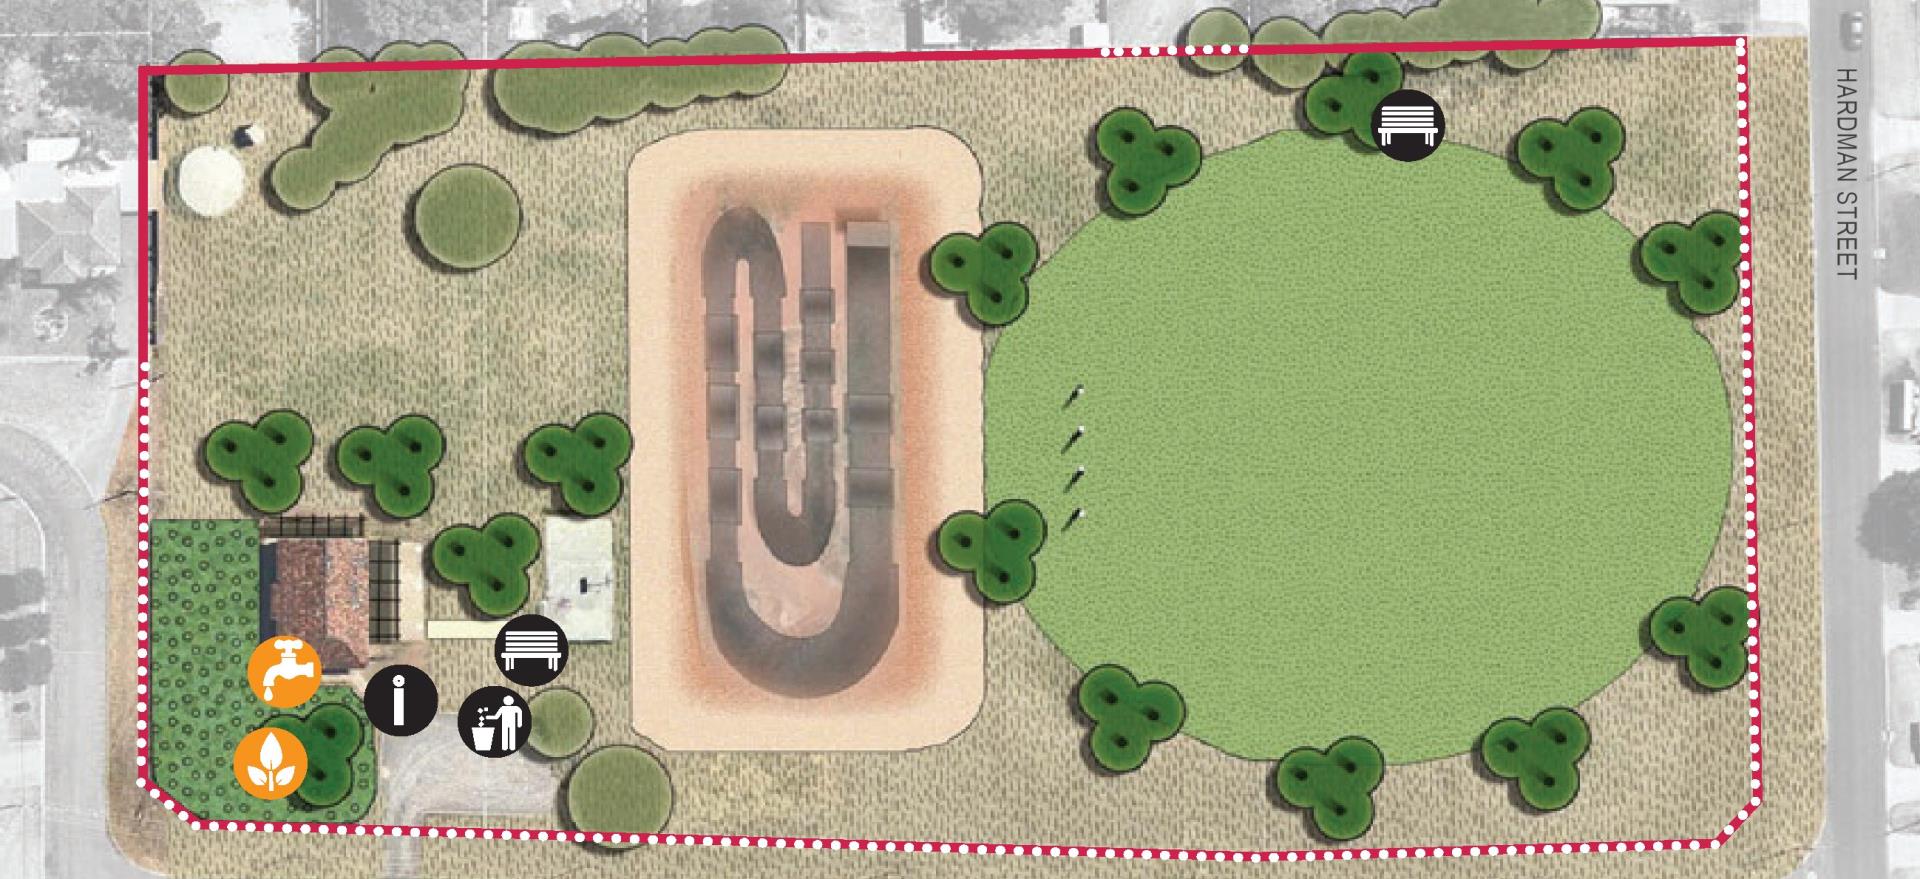 Concept design of a pump and jump track in the Levy Street Park.